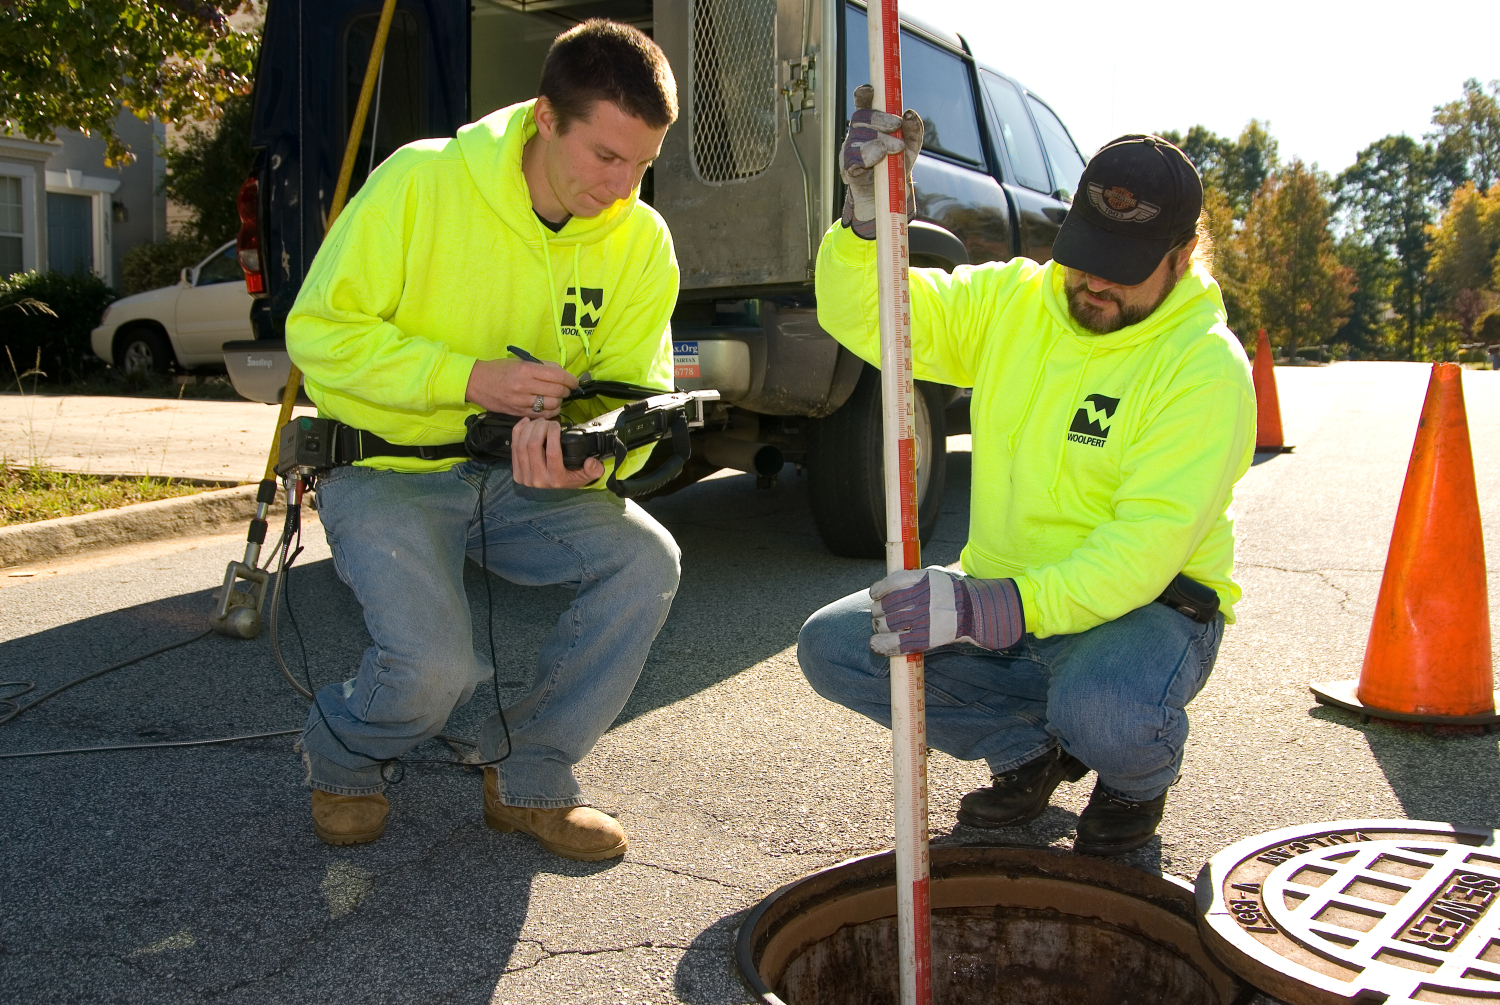 woolpert-contracted-for-5-6m-dekalb-county-sanitary-sewer-inspection